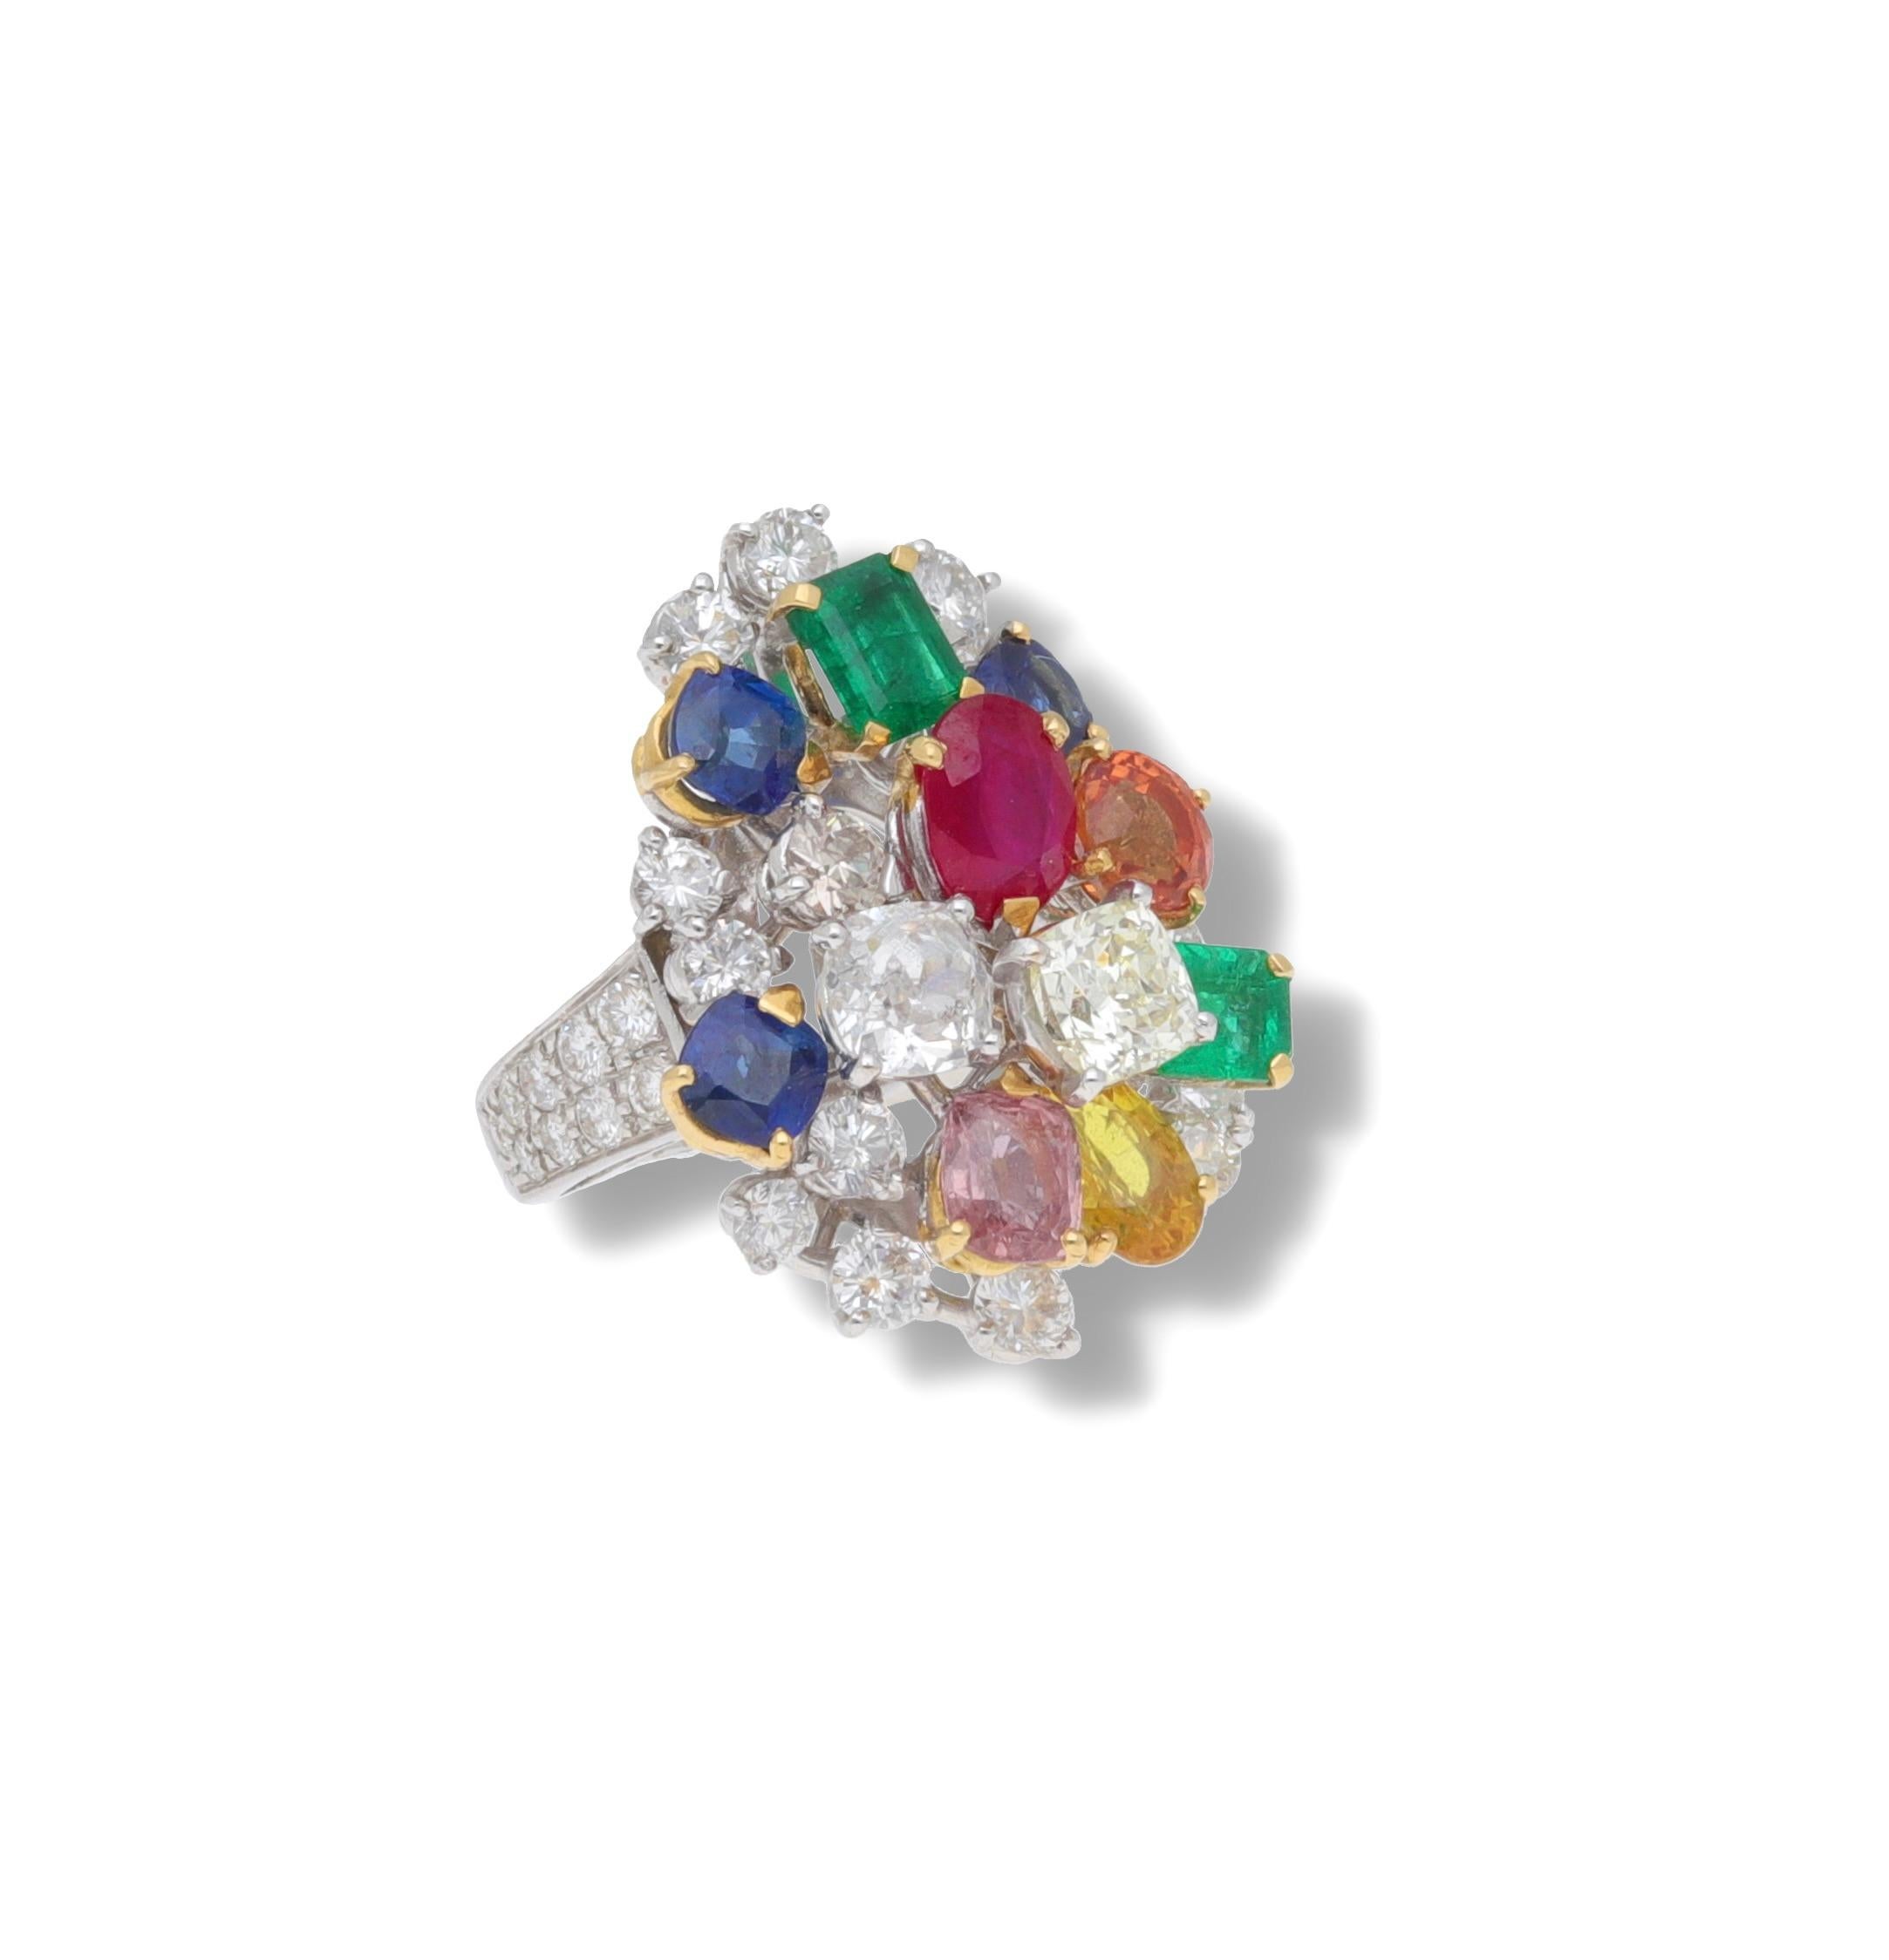 Handcrafted ring made in Italy of 18 kt. white gold with diamonds, sapphires, emeralds and rubies.
This ring belongs to the Dolce Vita Fraleoni Collection.
Classic lines reminiscent of 1950s designs.
Unique piece.
Size: 7
The ring is